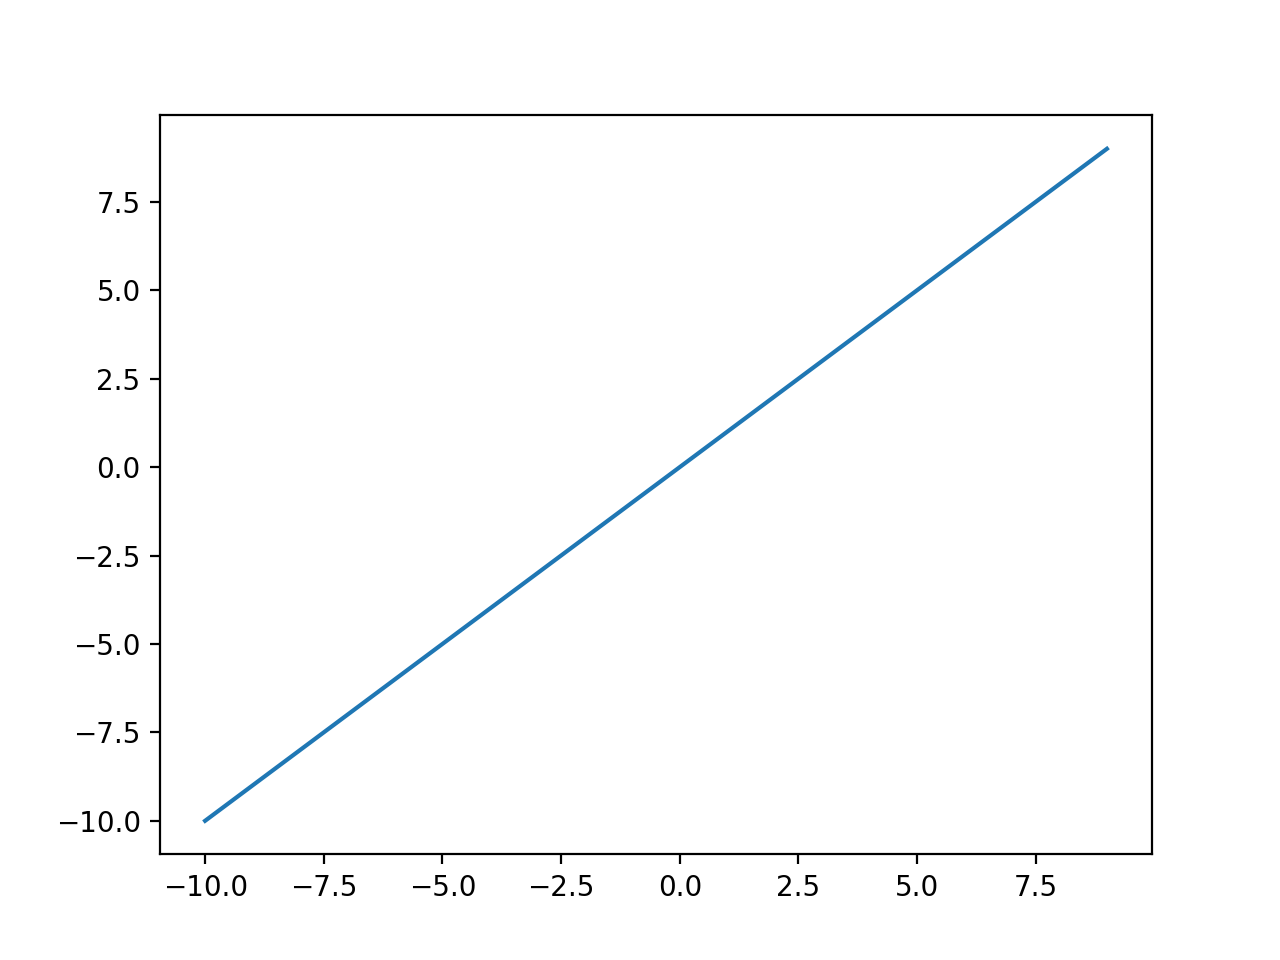 Plot of Inputs vs. Outputs for the Linear Activation Function